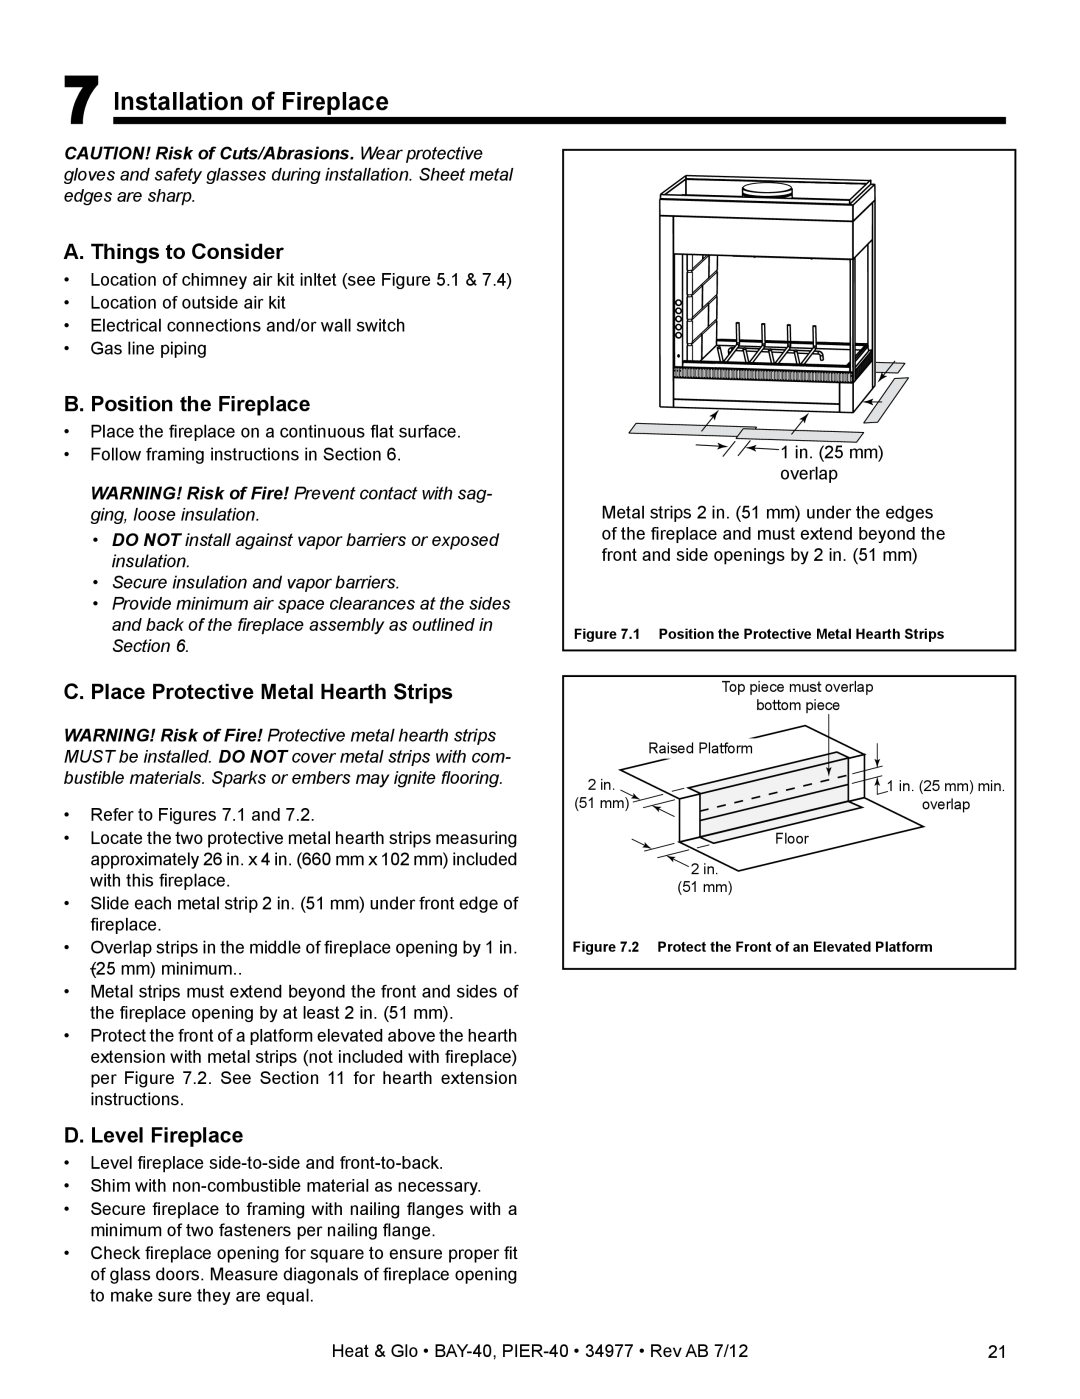 Heat & Glo LifeStyle PIER-40 owner manual 7Installation of Fireplace, A. Things to Consider, B. Position the Fireplace 